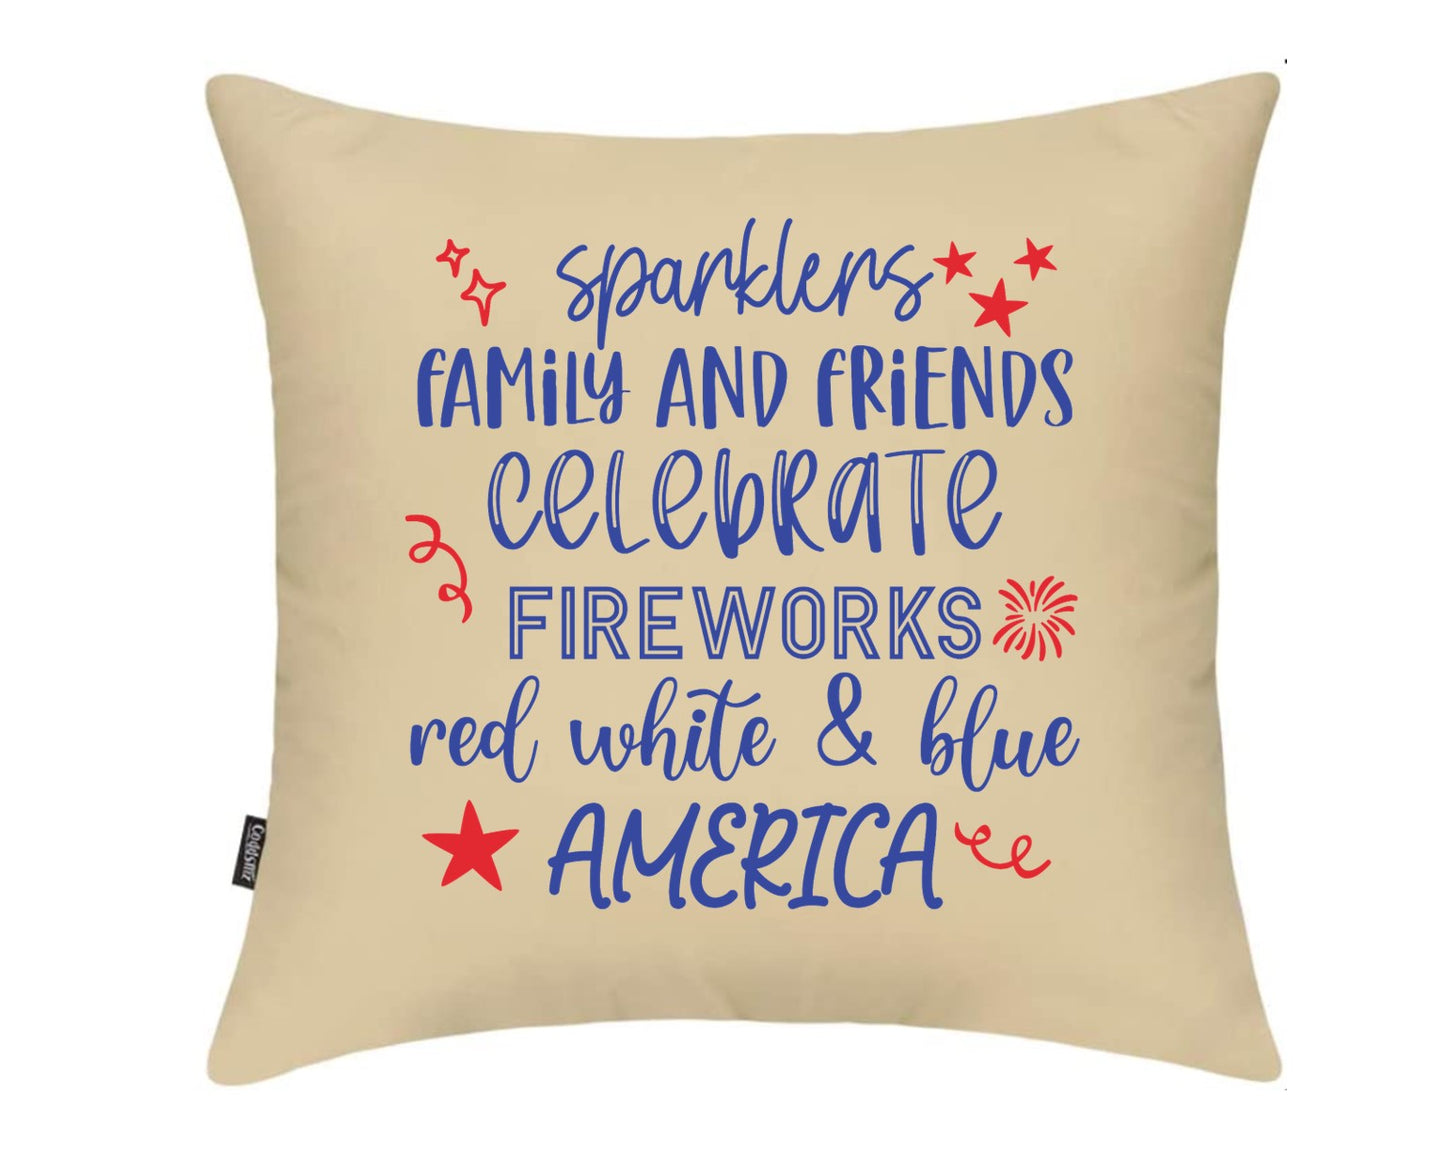 4th of July pillow case cover